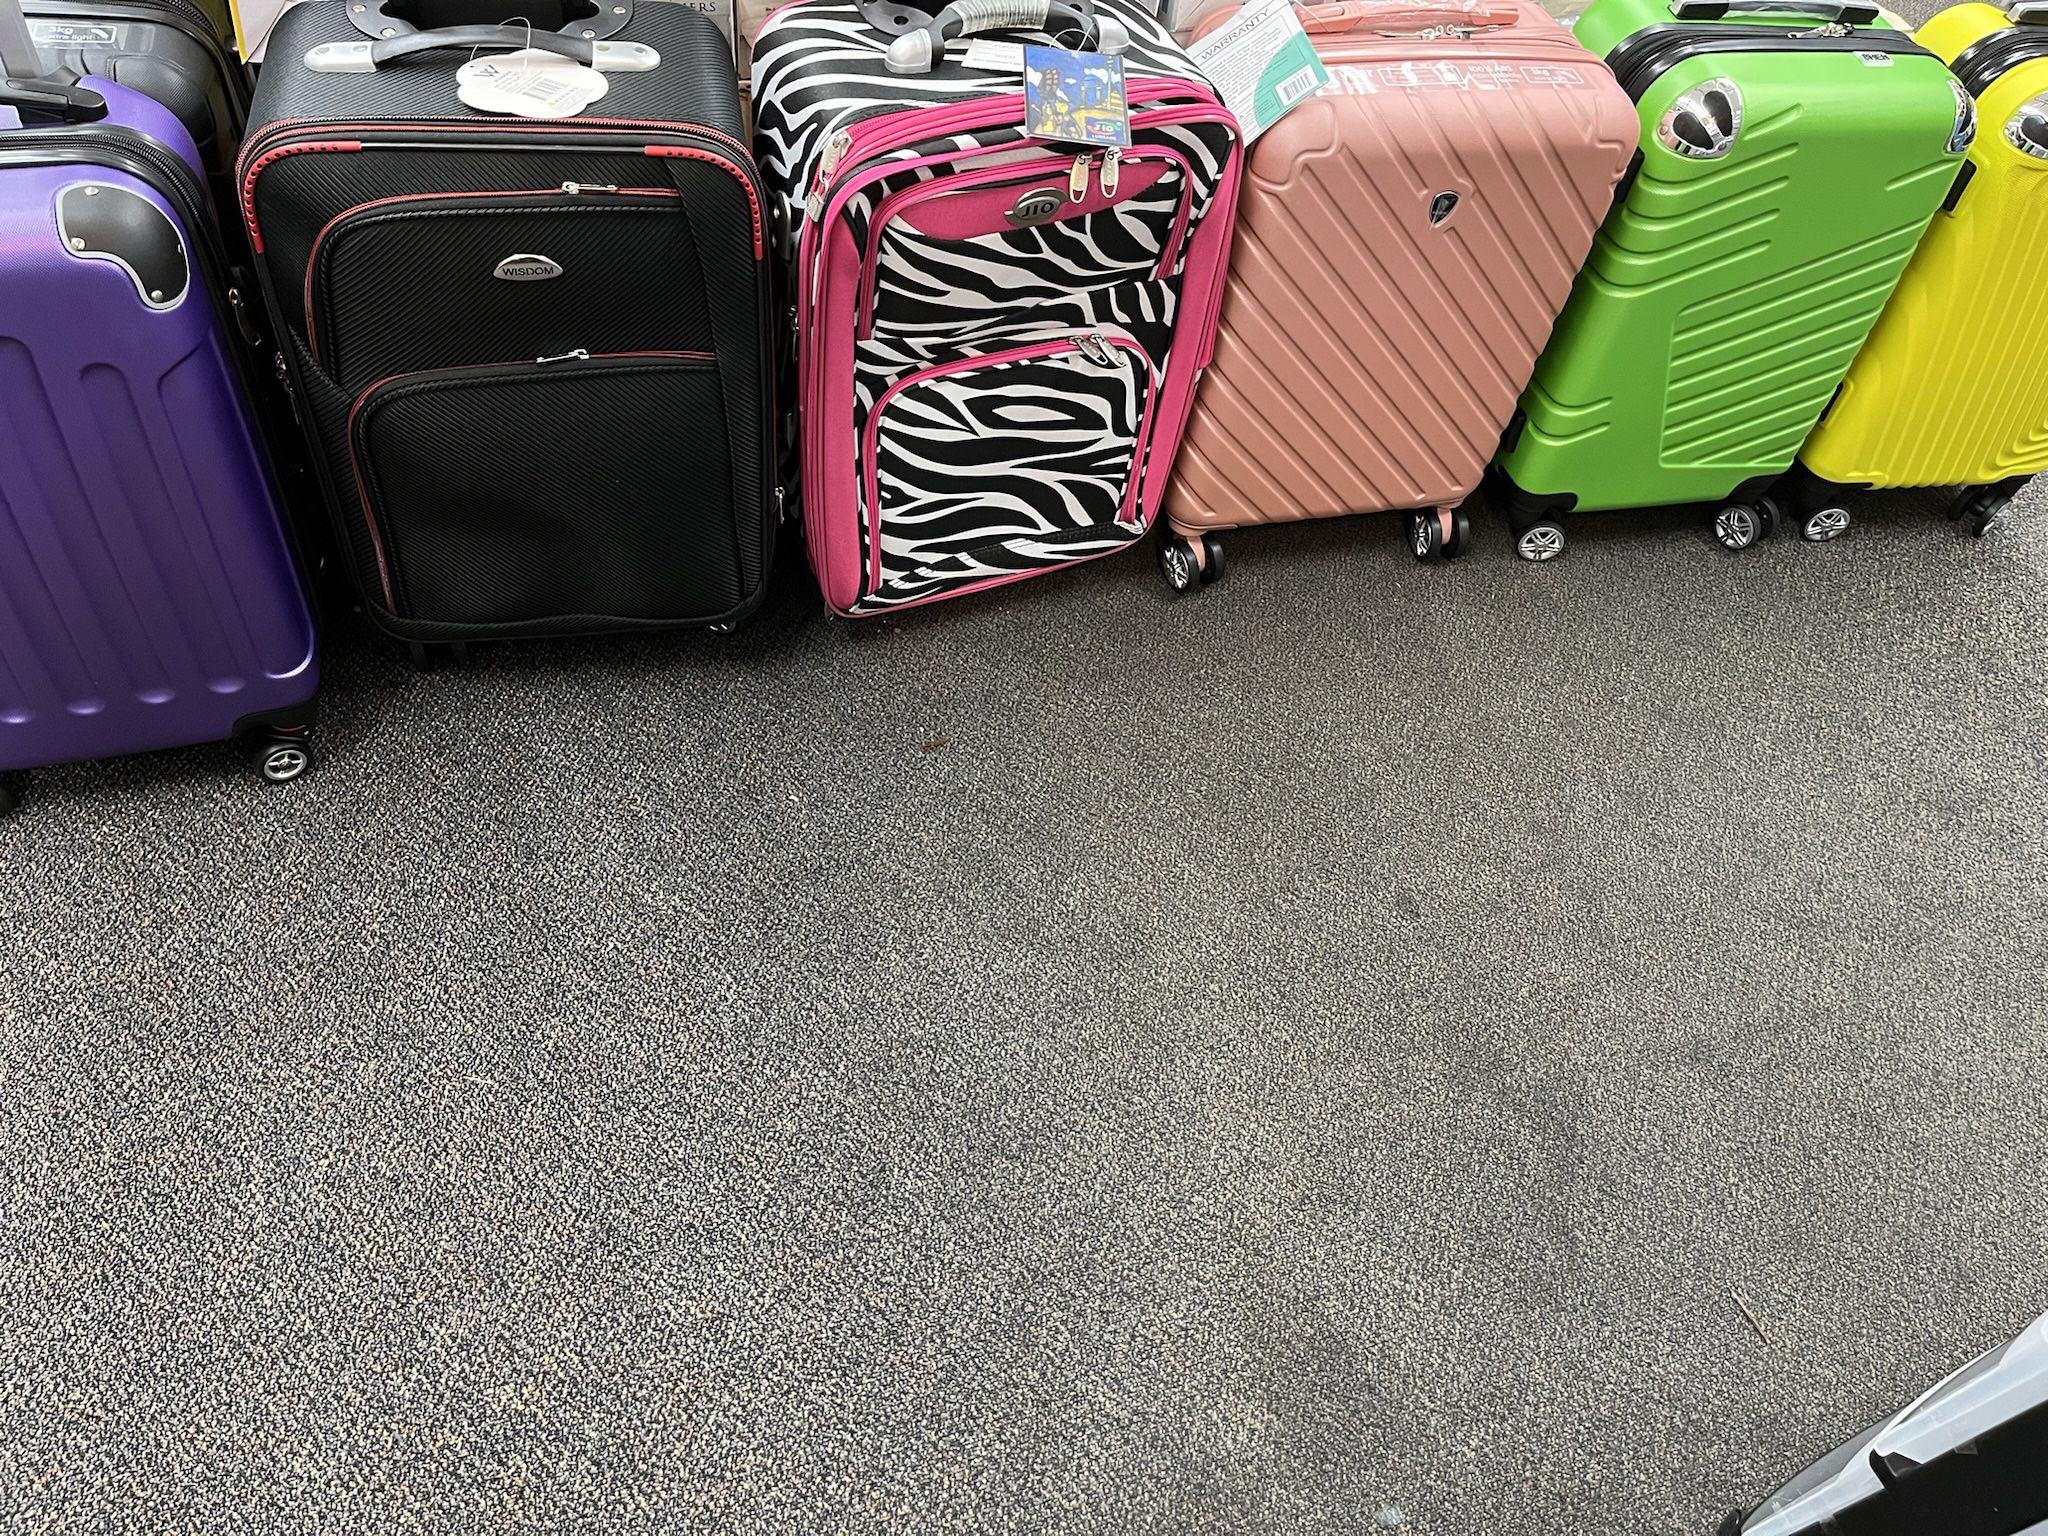 Away Carry-on Luggage (coast) for Sale in Campbell, CA - OfferUp